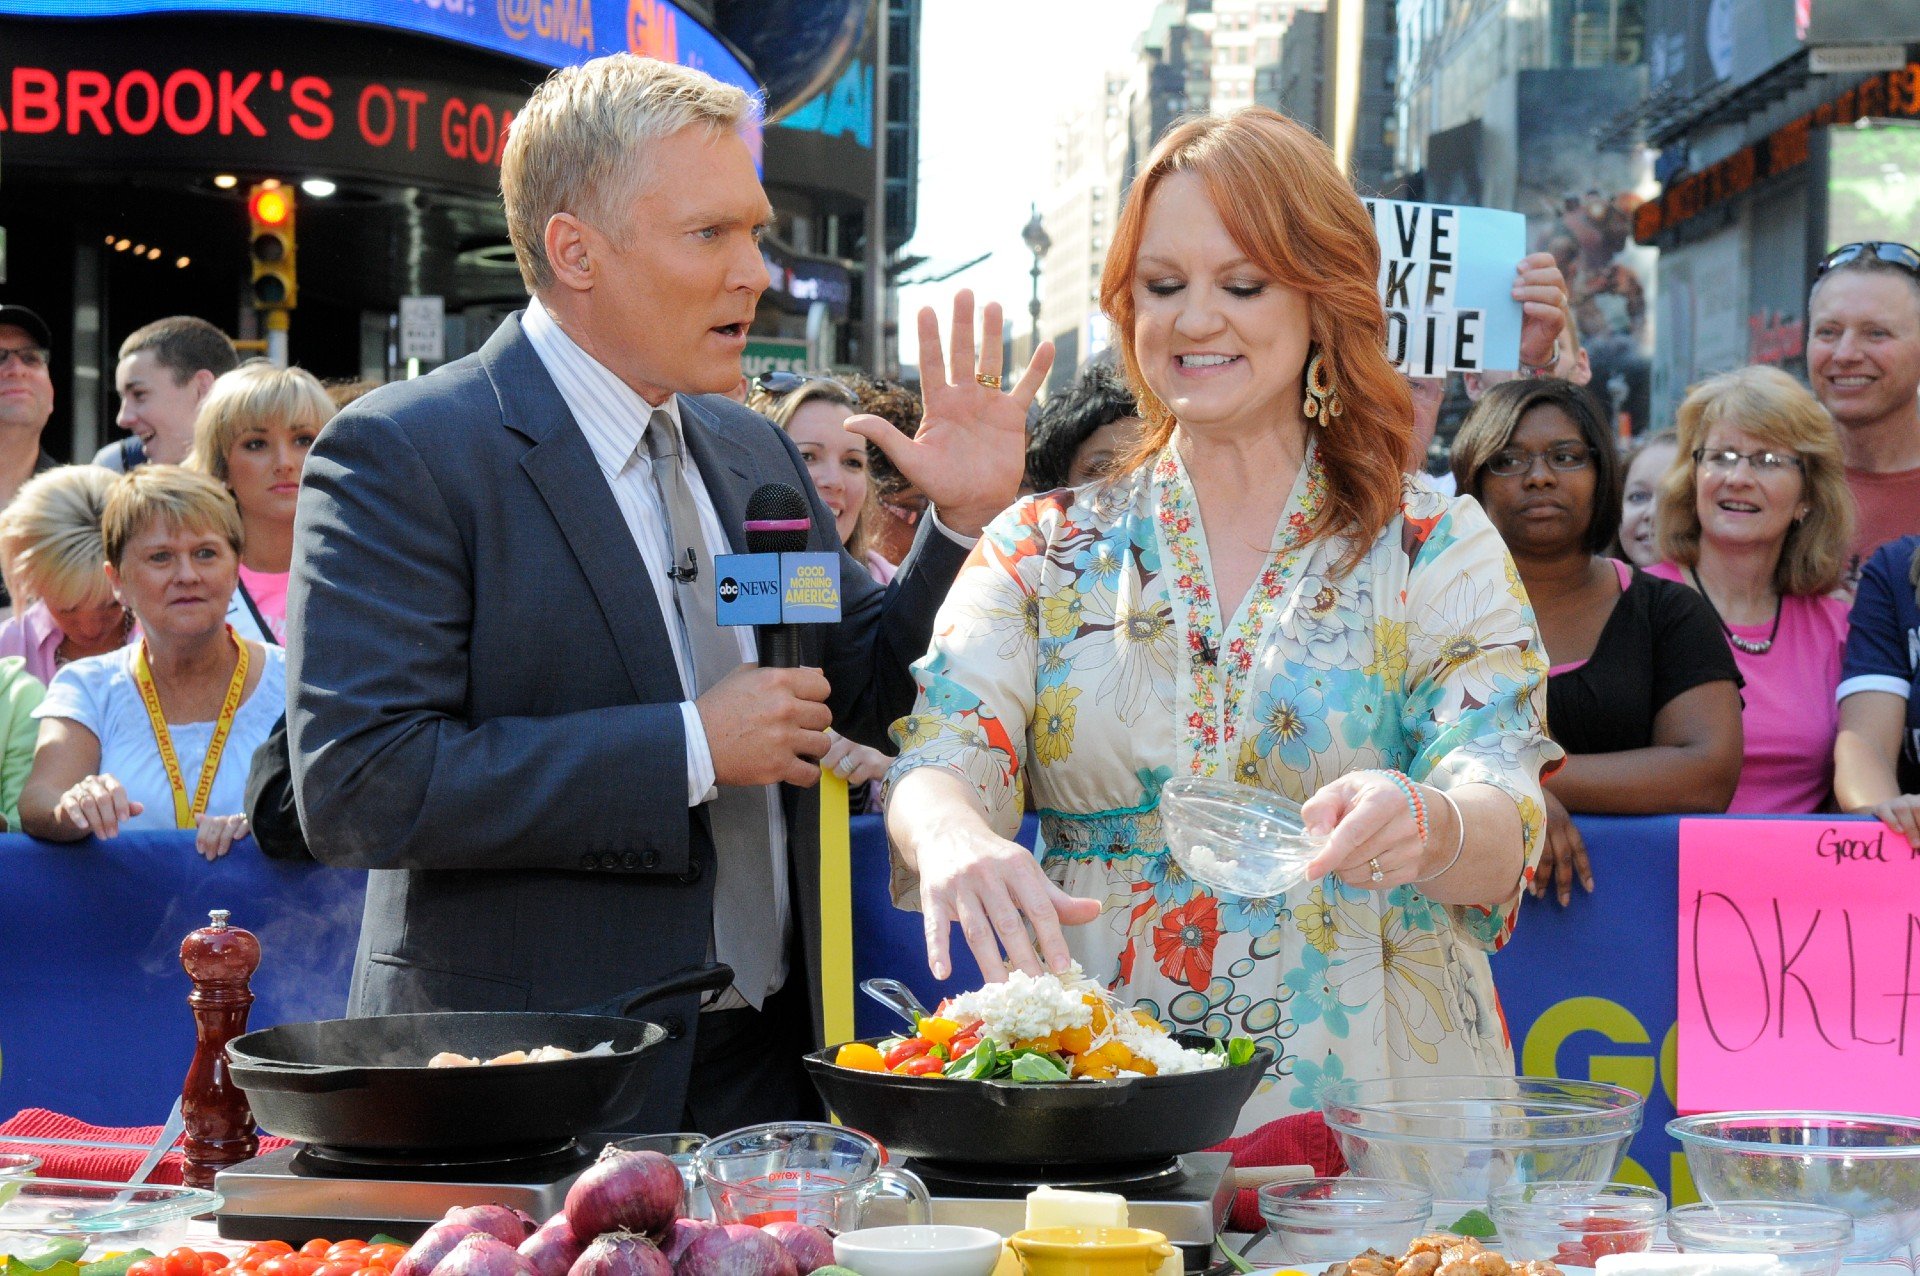 Ree Drummond and Sam Champion talk about her latest dish on Good Morning America.